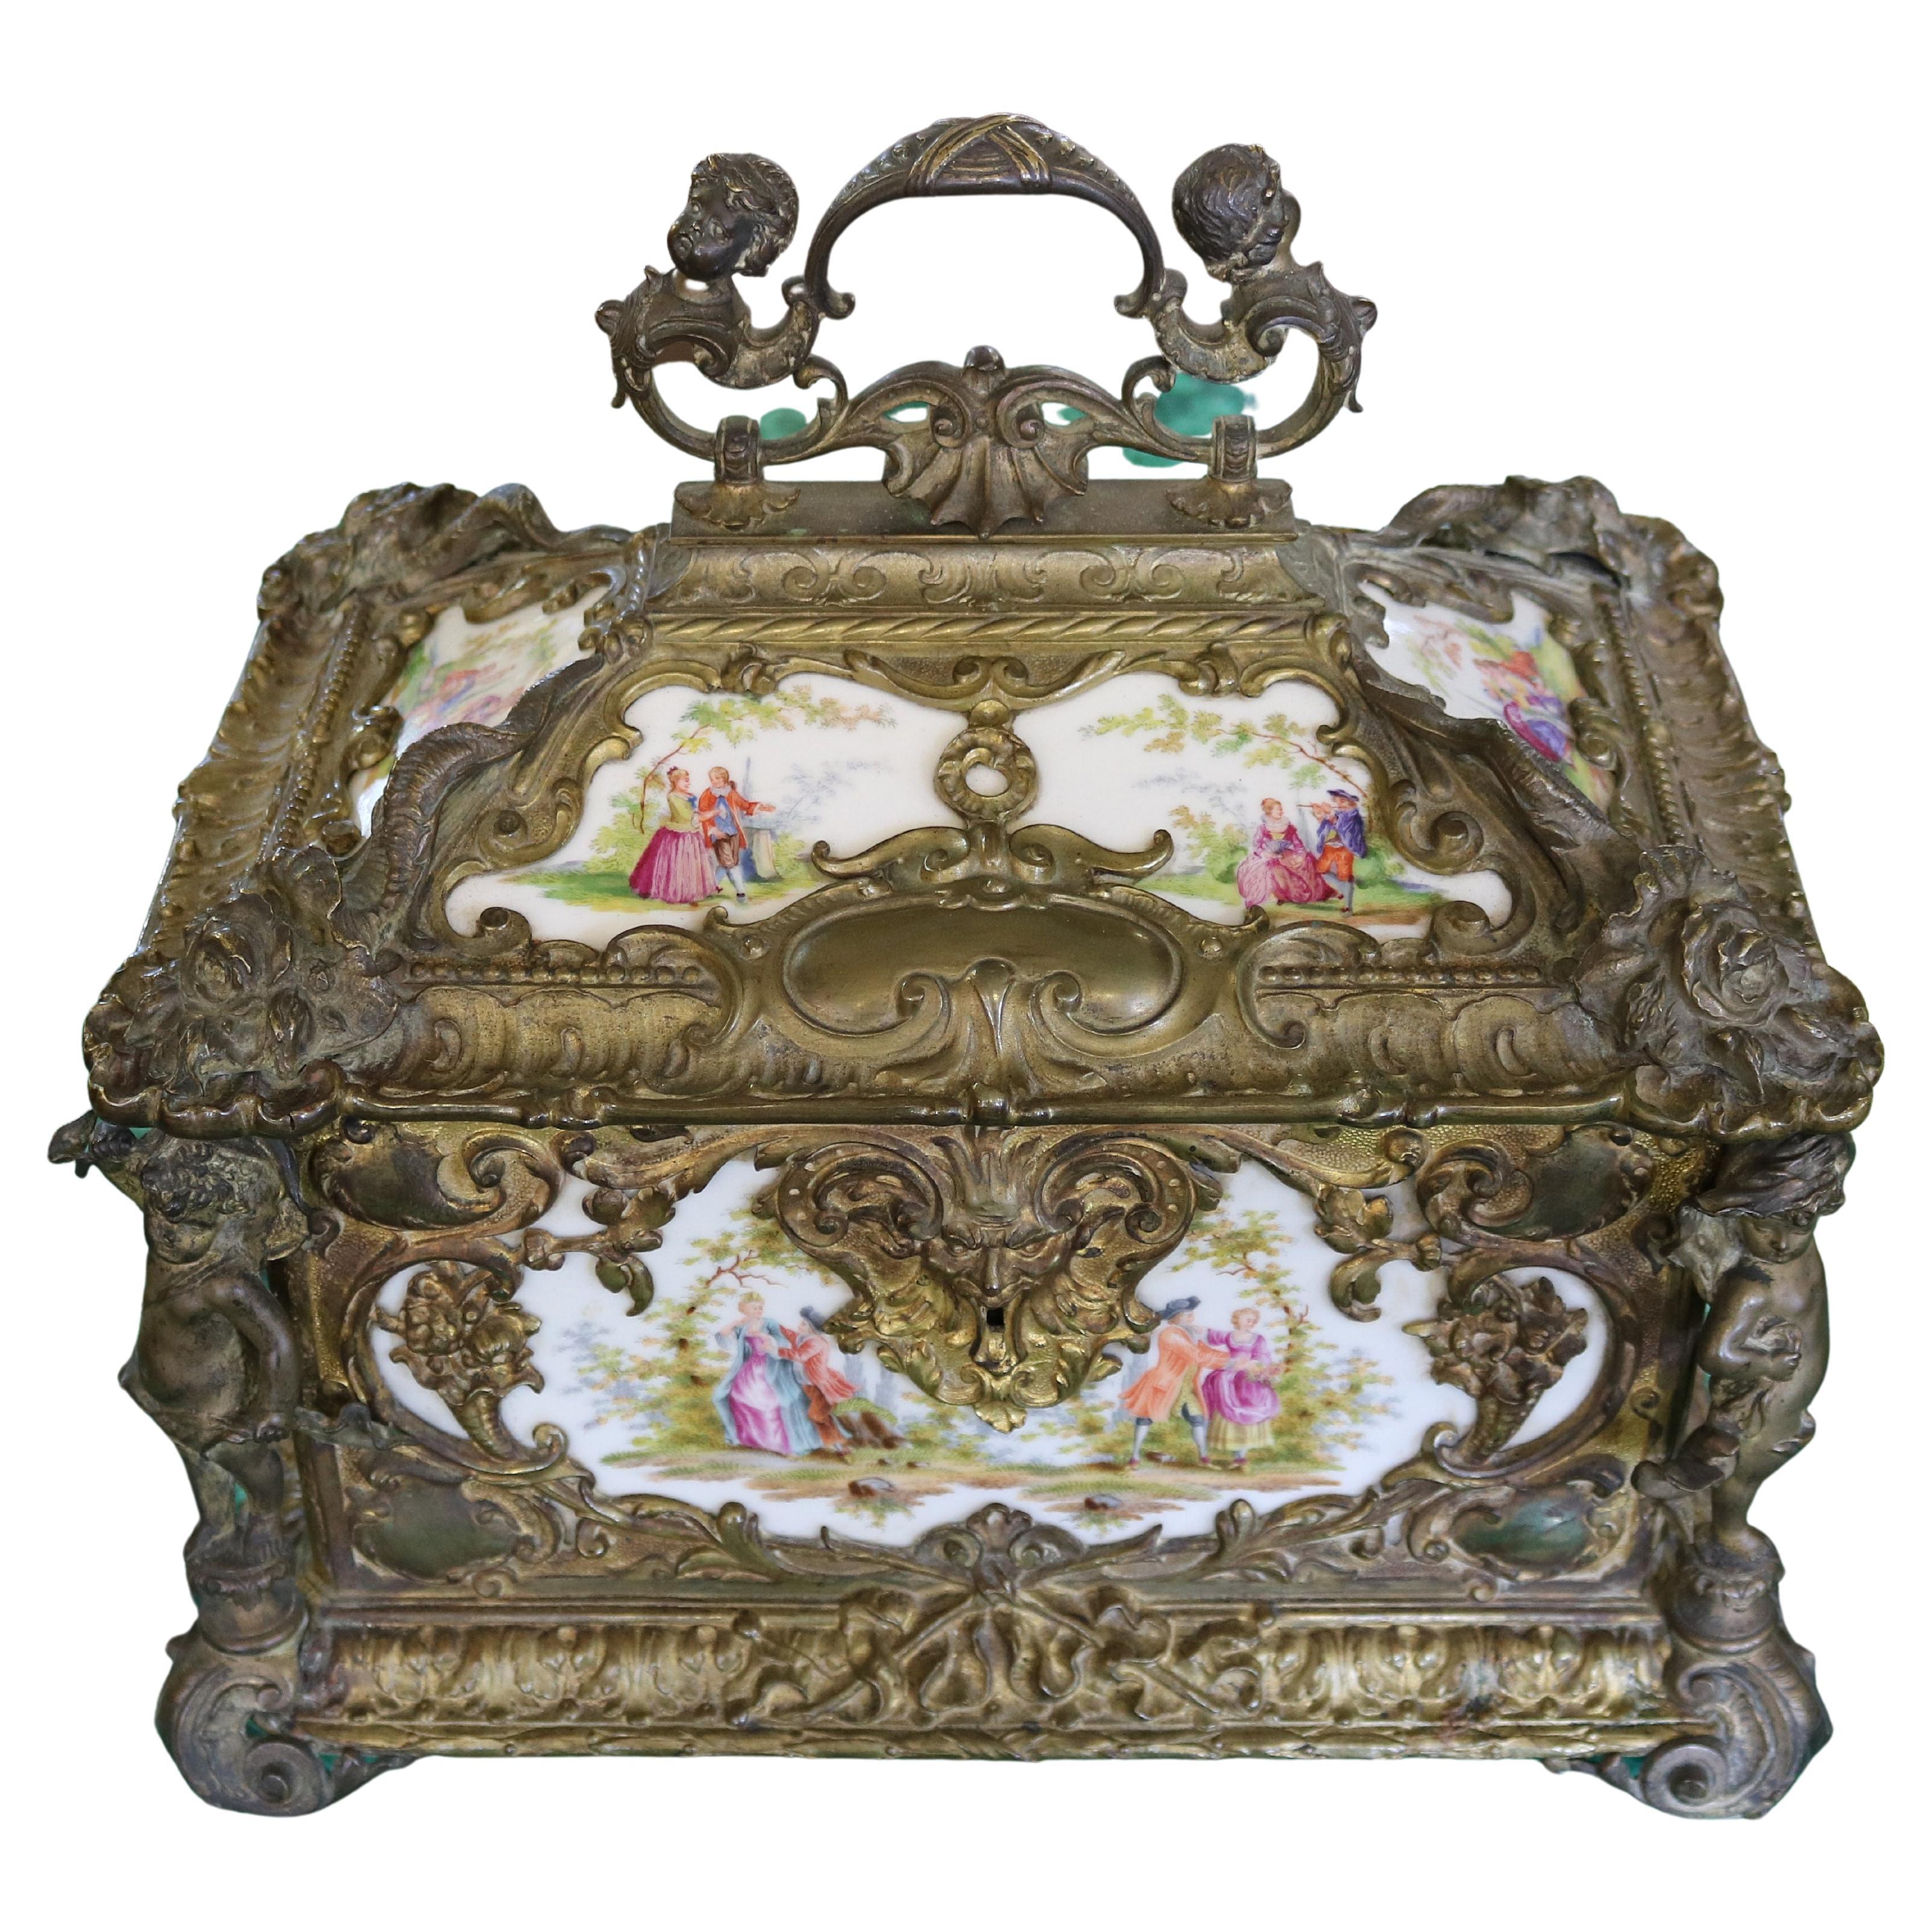 Outstanding Large 19th Century Bronze & Porcelain Jewelry Casket Box